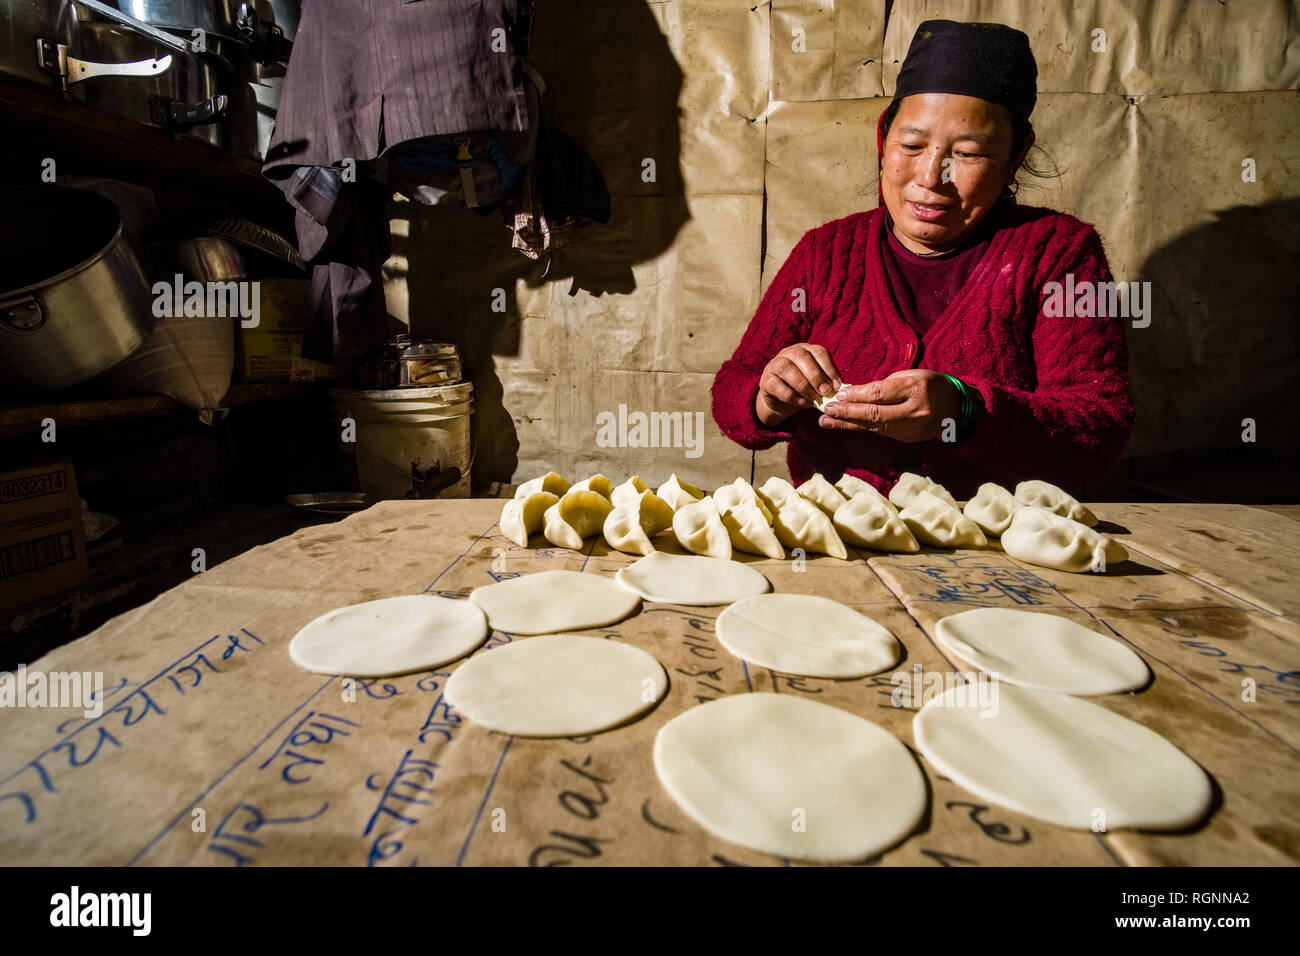 A local woman working in a traditional kitchen, preparing the local dish Momo Stock Photo